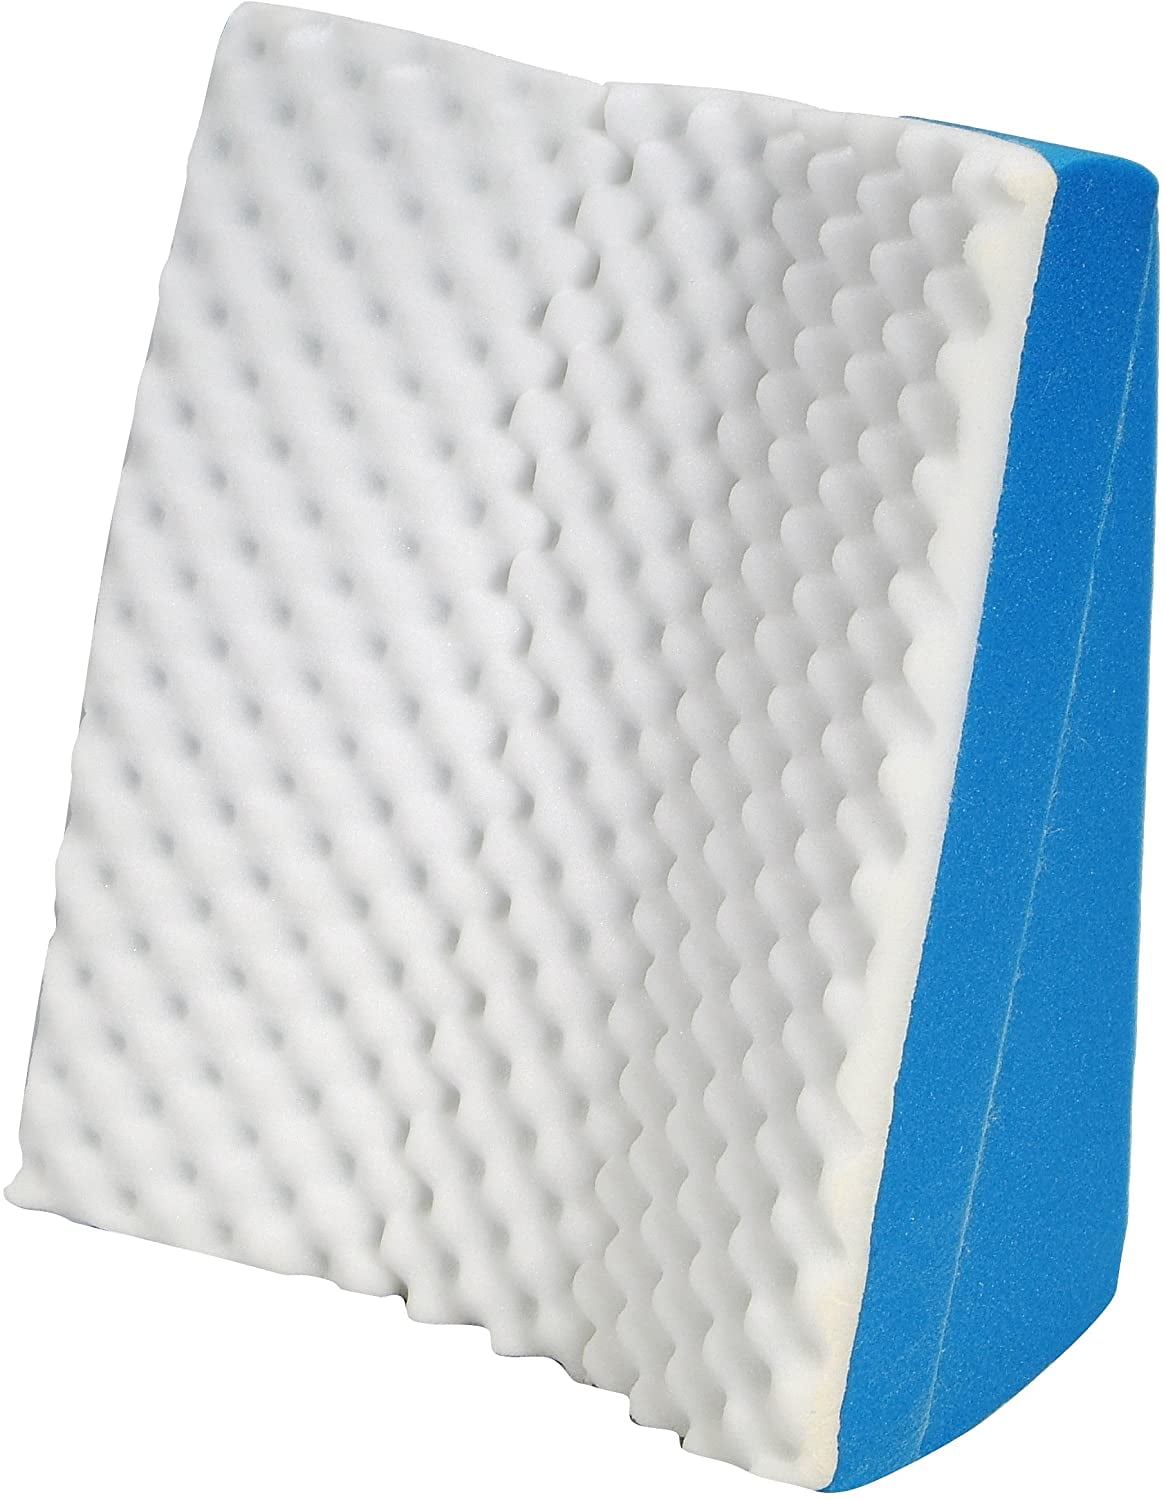 Bed Wedge with Half Roll Pillow - Welcome to Alpine Home Medical Equipment